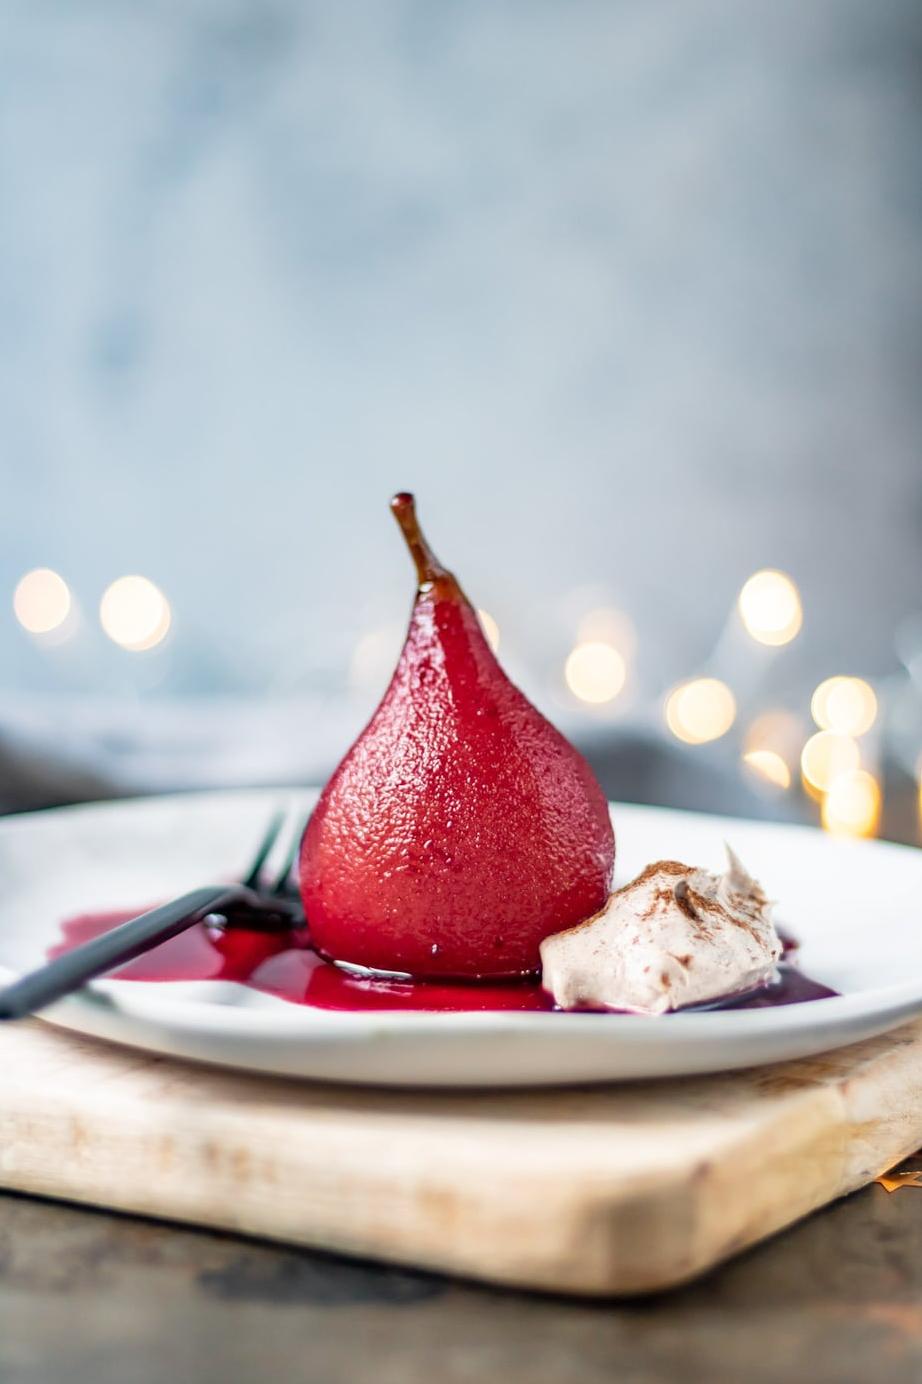  The juicy and tender pears are caramelized in a red wine sauce, for a sweet and tangy flavor.